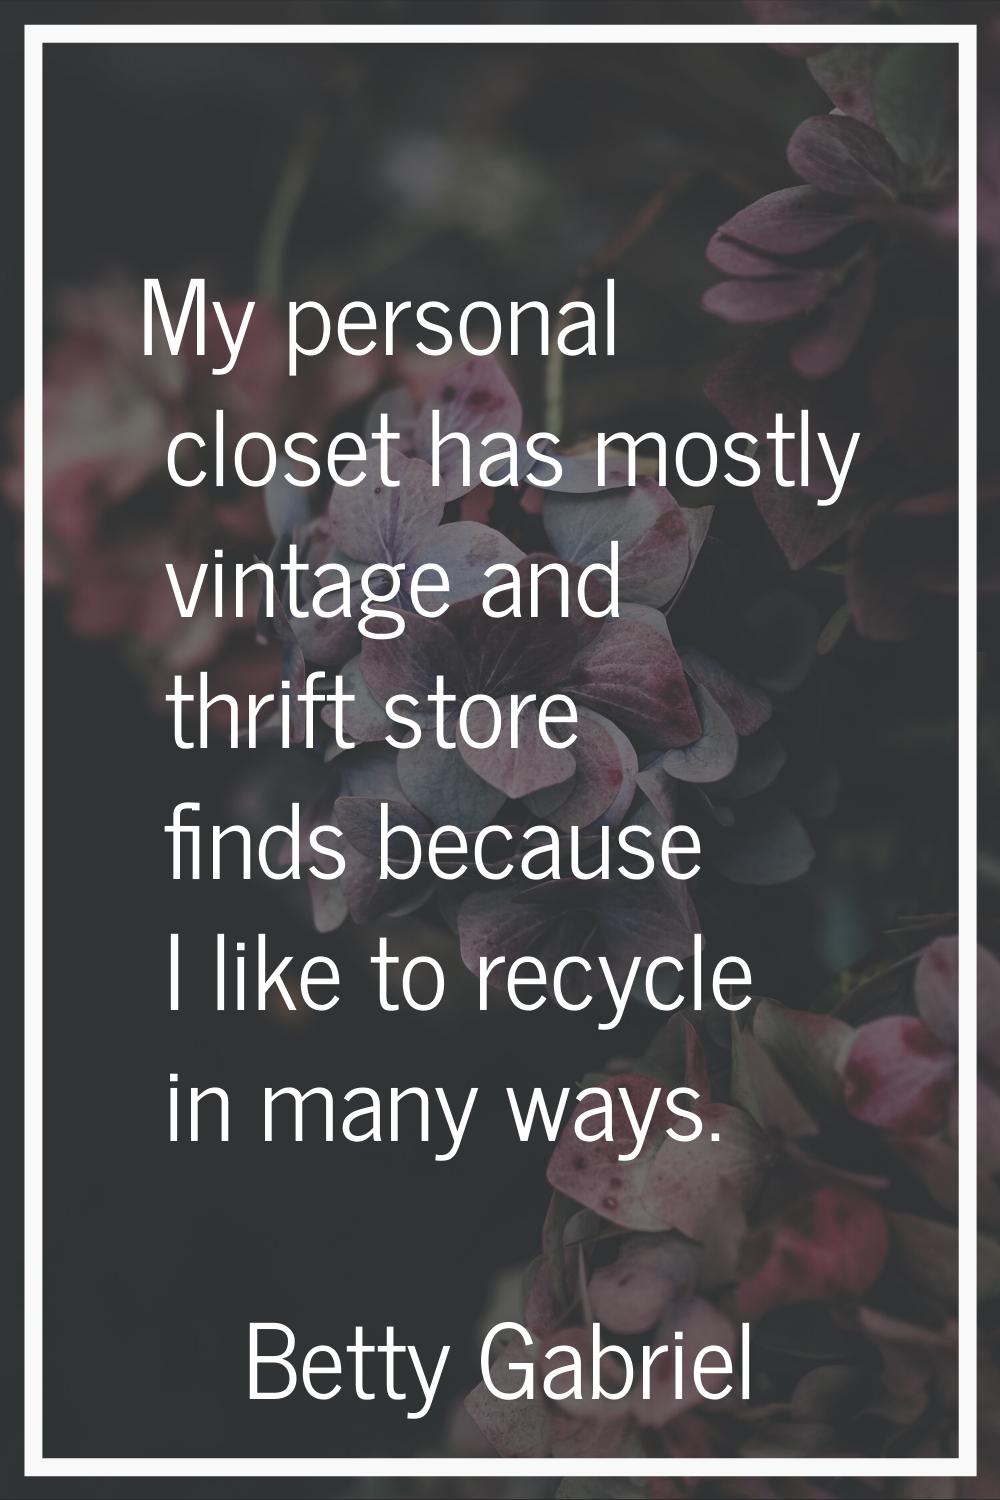 My personal closet has mostly vintage and thrift store finds because I like to recycle in many ways